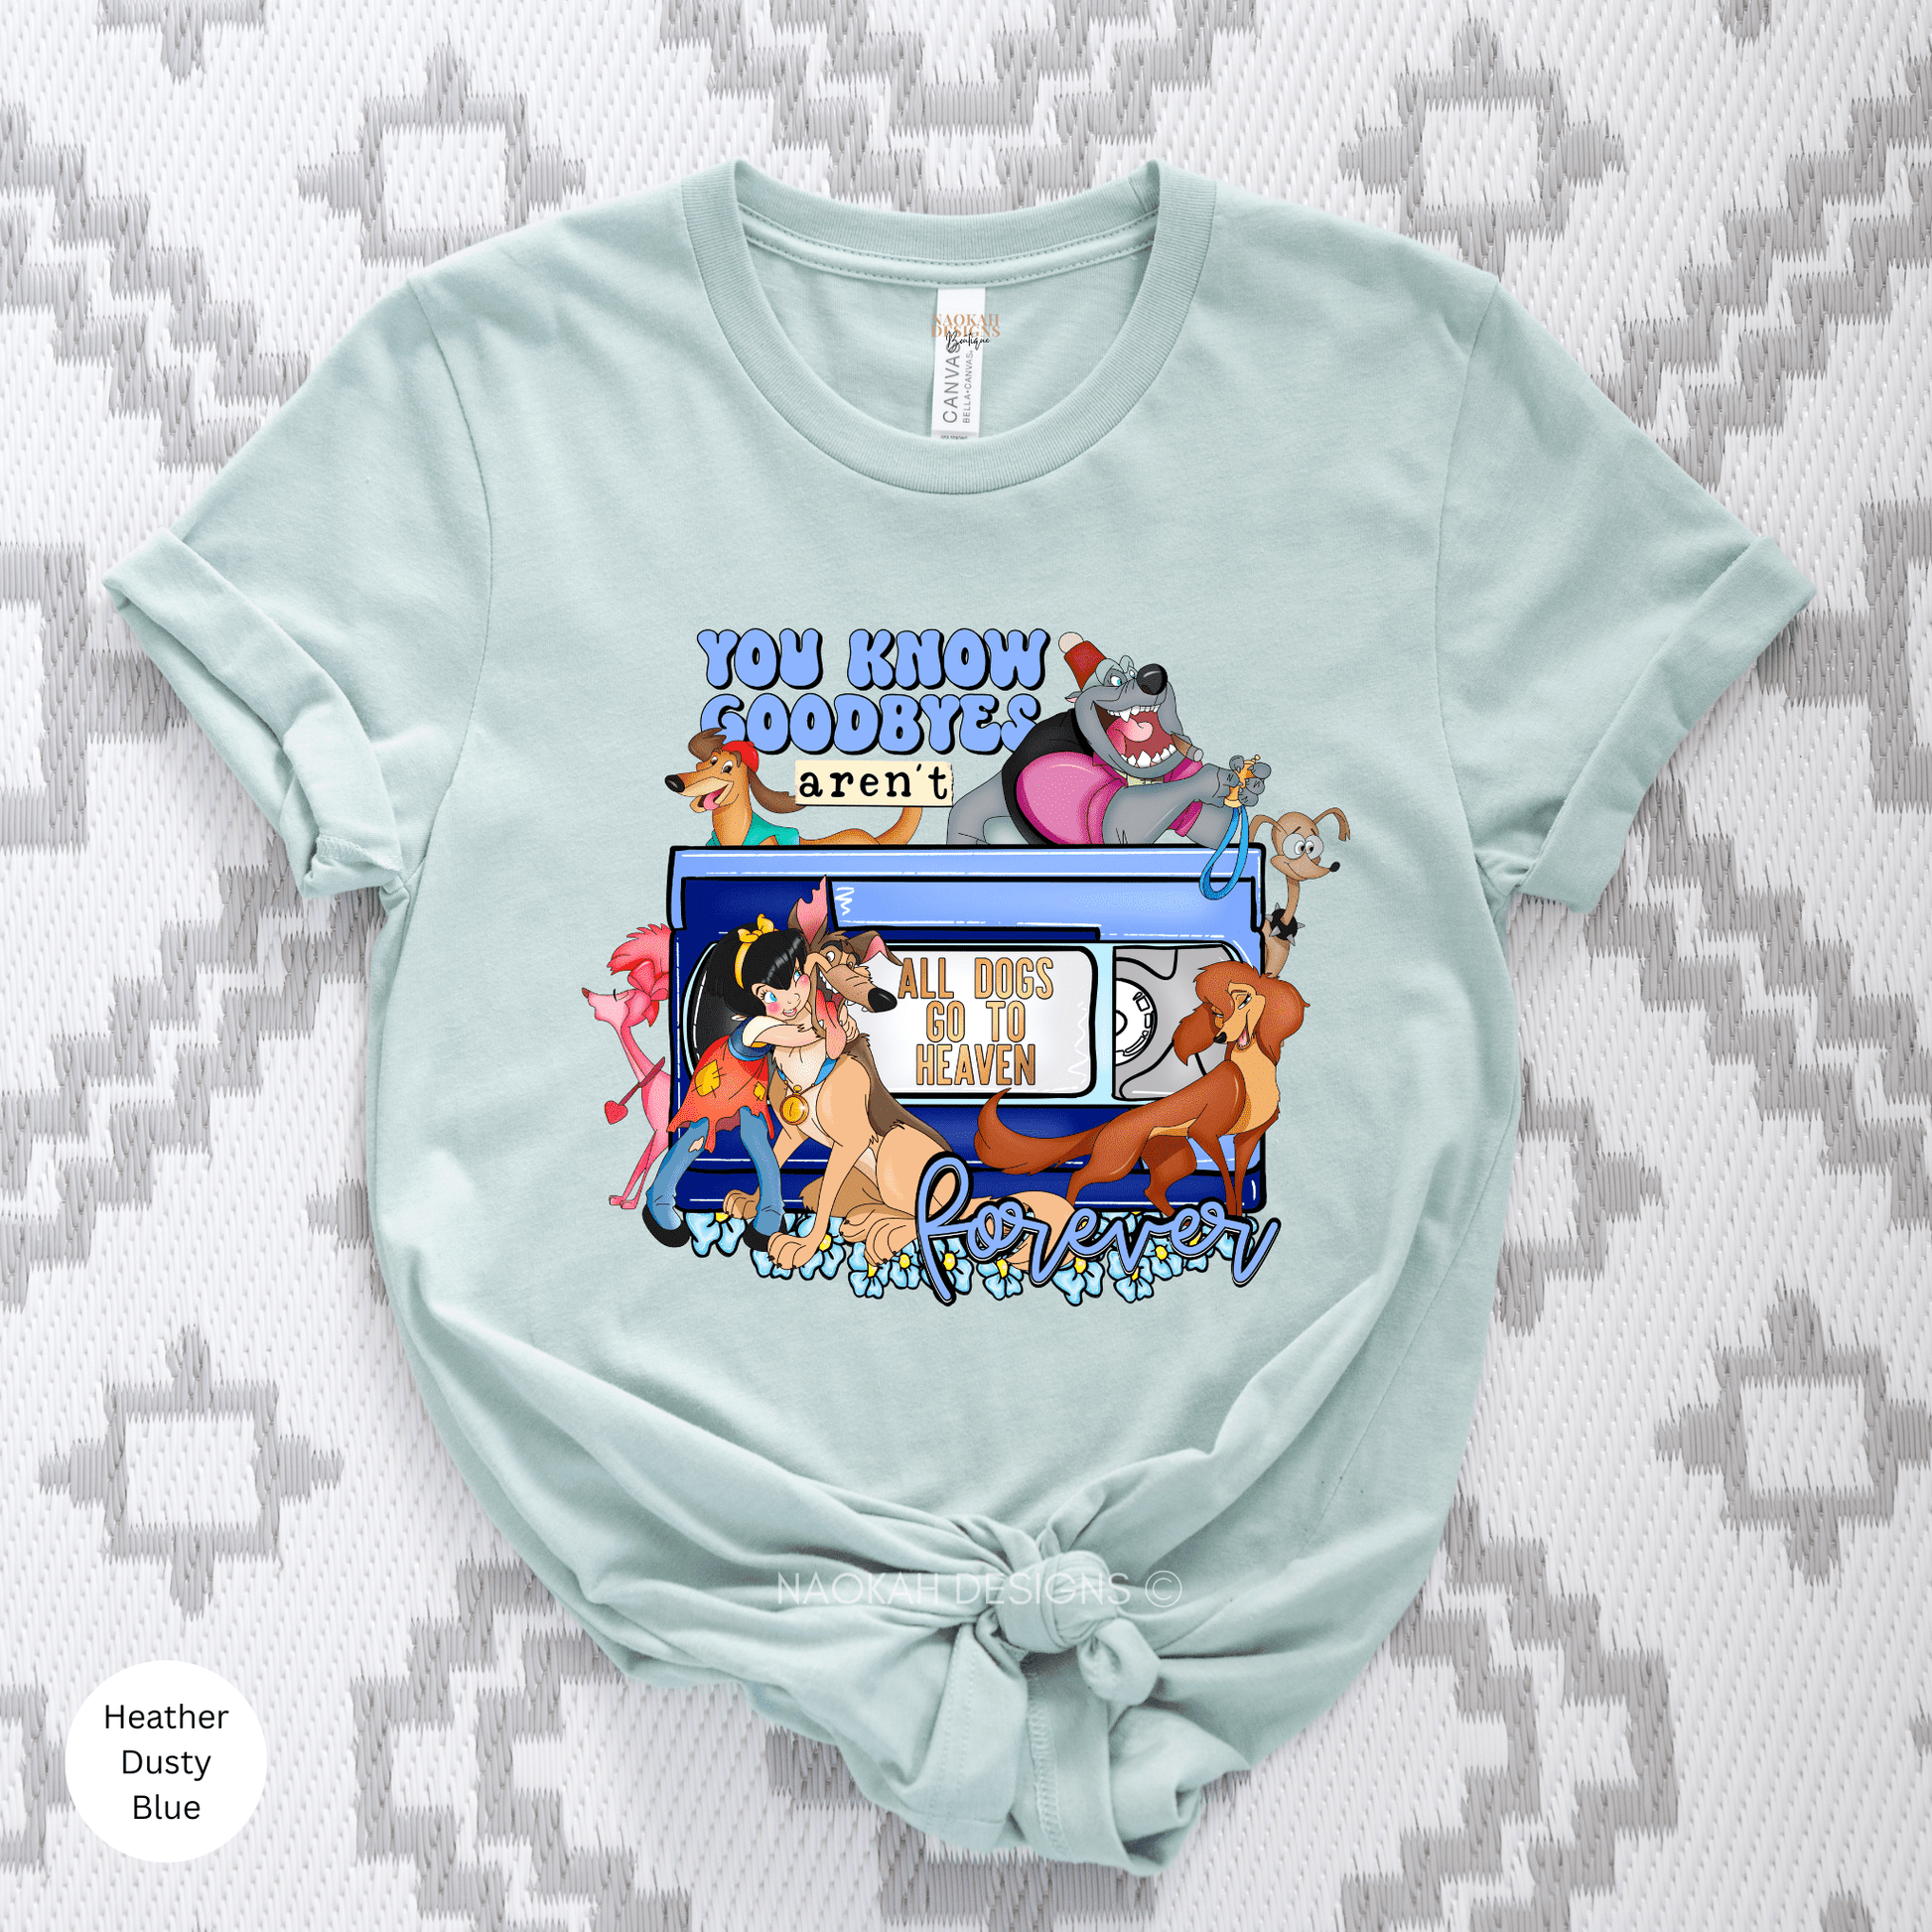 You Know Goodbyes Aren't Forever Shirt, All Dogs Go To Heaven, Fairytale Shirt, Classic Movie Shirt, Girls Best Friend Tee, Angel Charlie